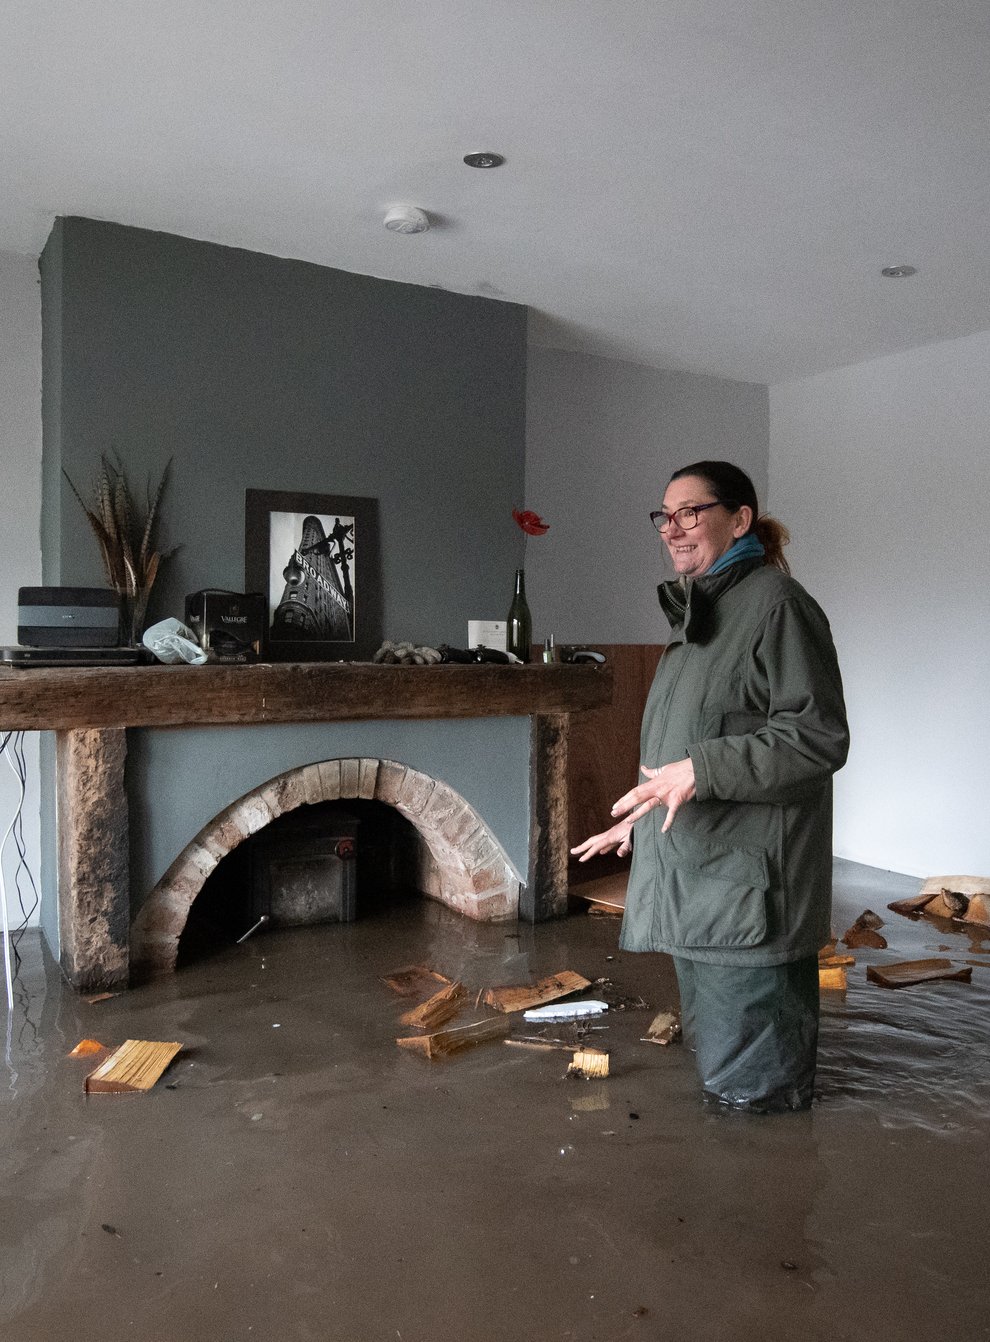 Gabrielle Burns-Smith looks out from her flooded home on the outskirts of Lymm (Joe Giddens/PA)